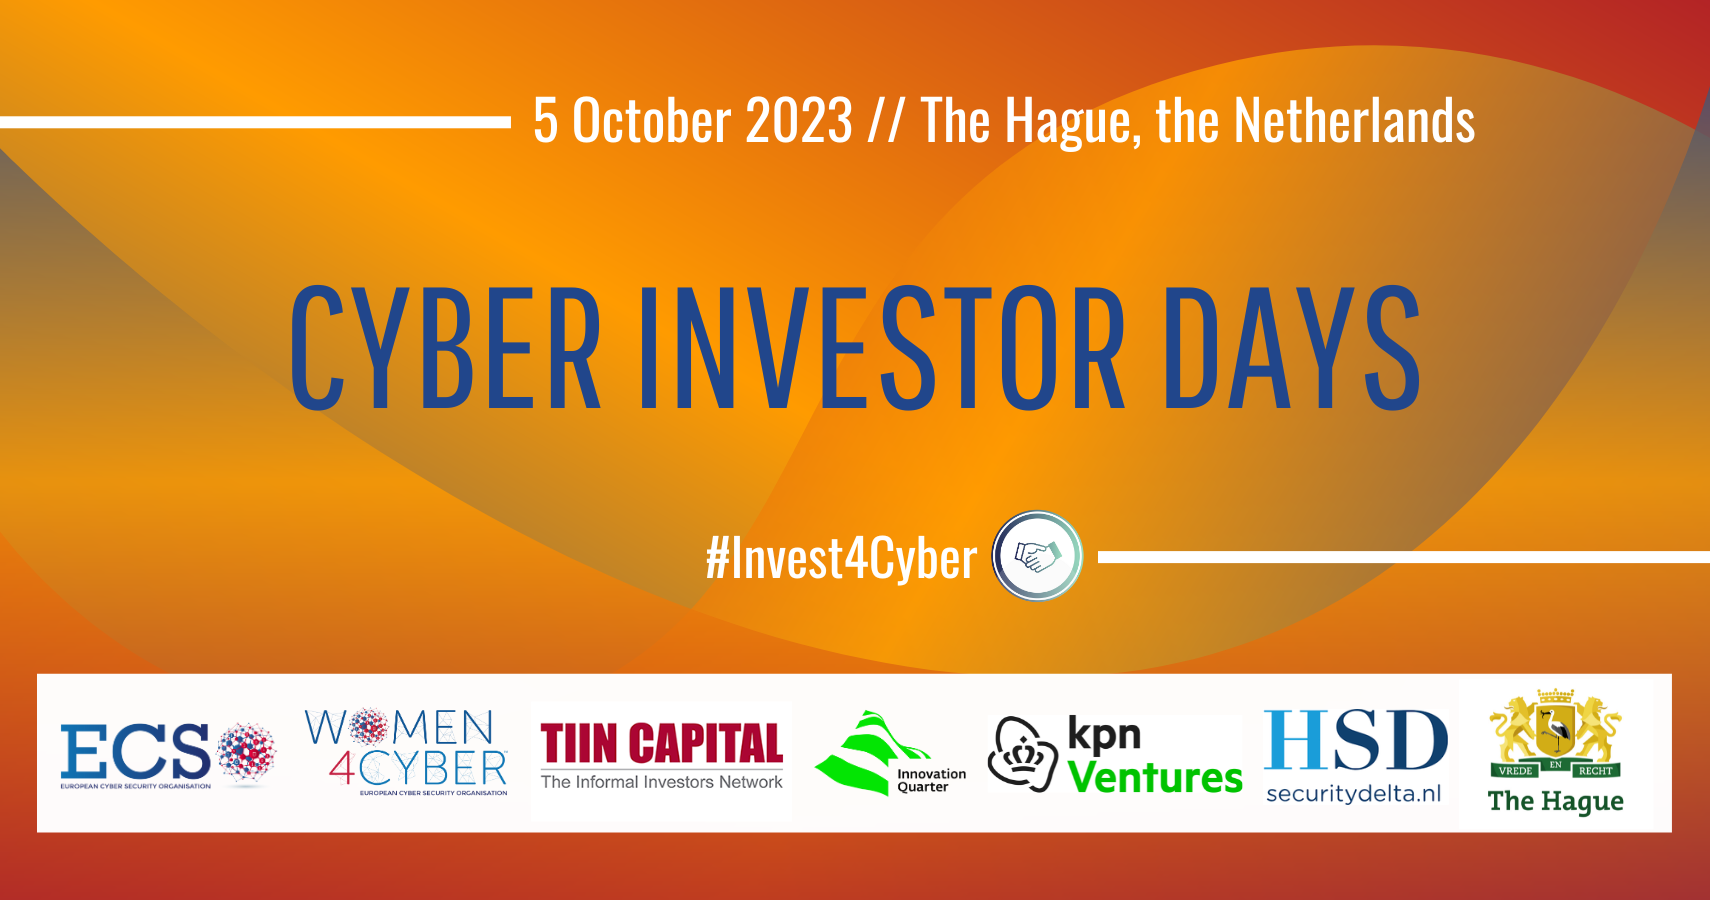 ECSO Cyber Investor Days in The Hague